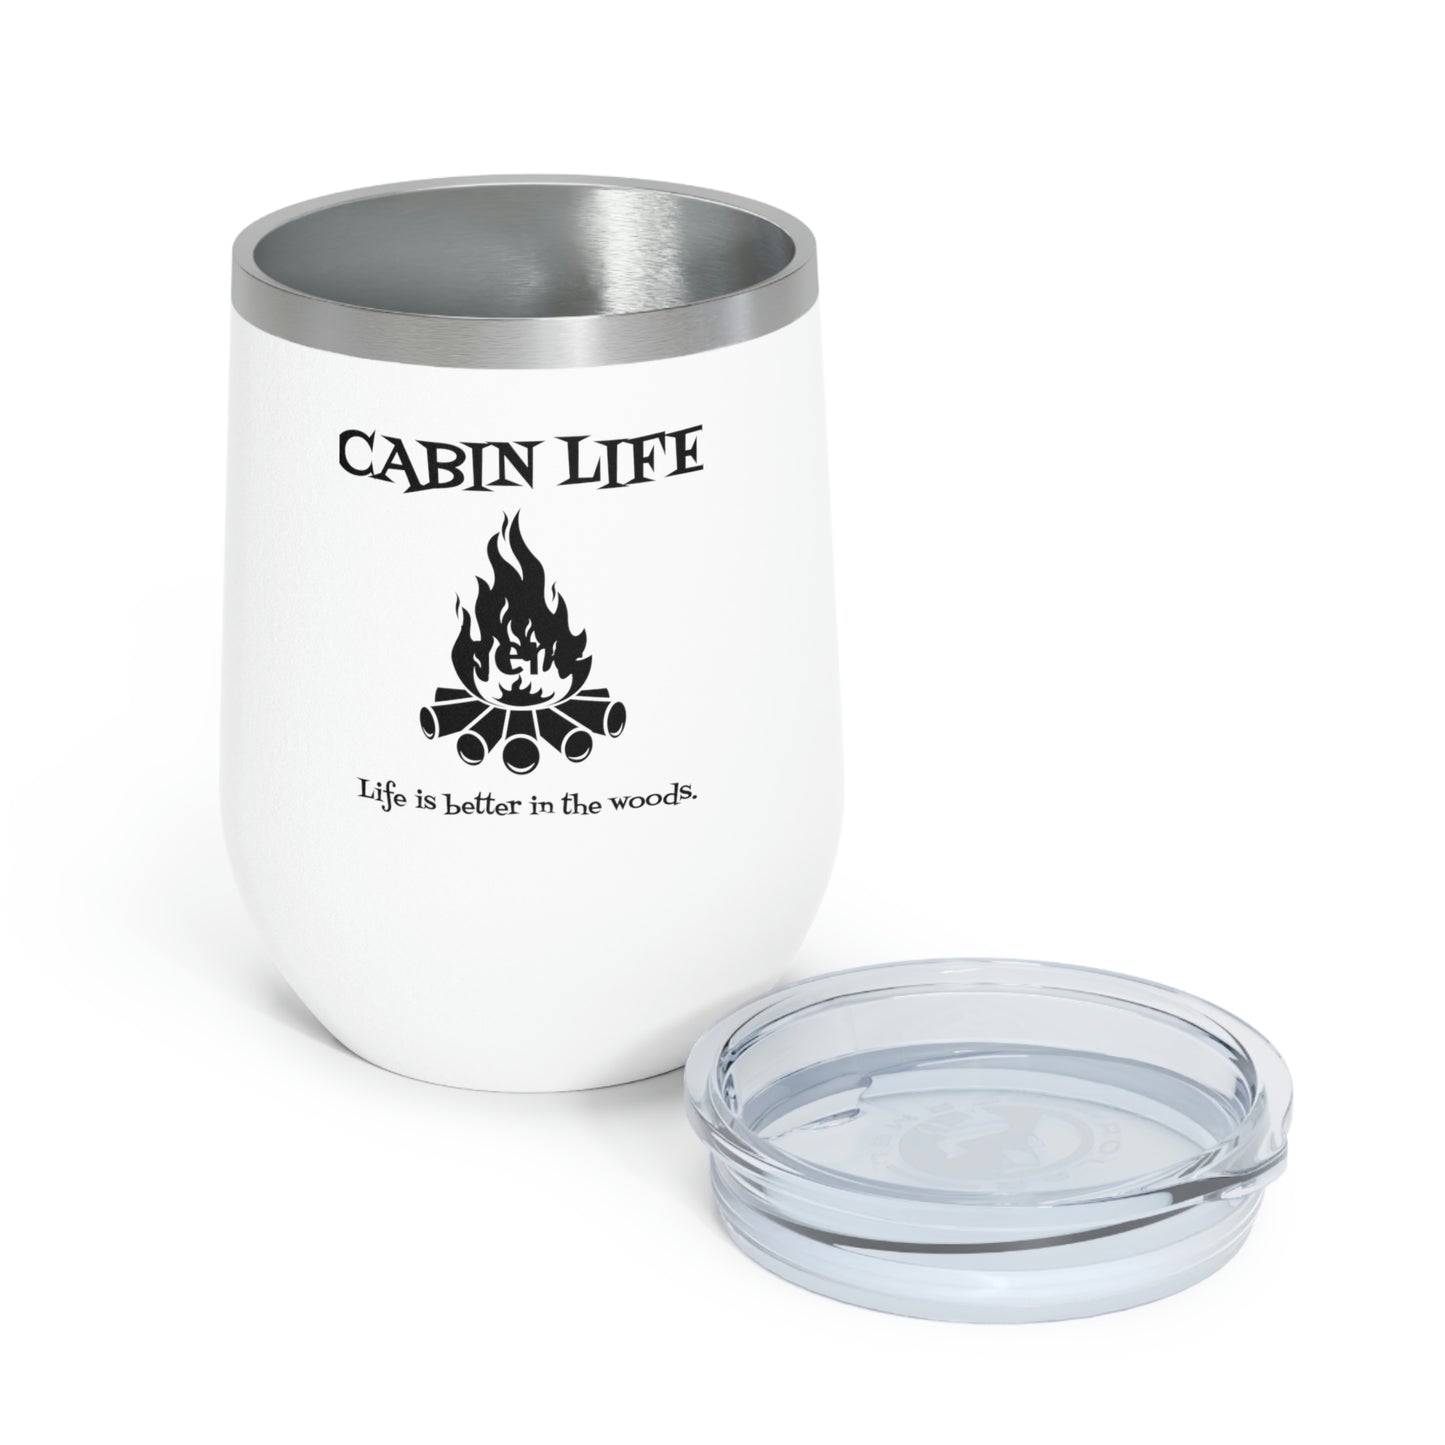 Cabin Life - Life is better in the woods 12oz Insulated Wine Tumbler